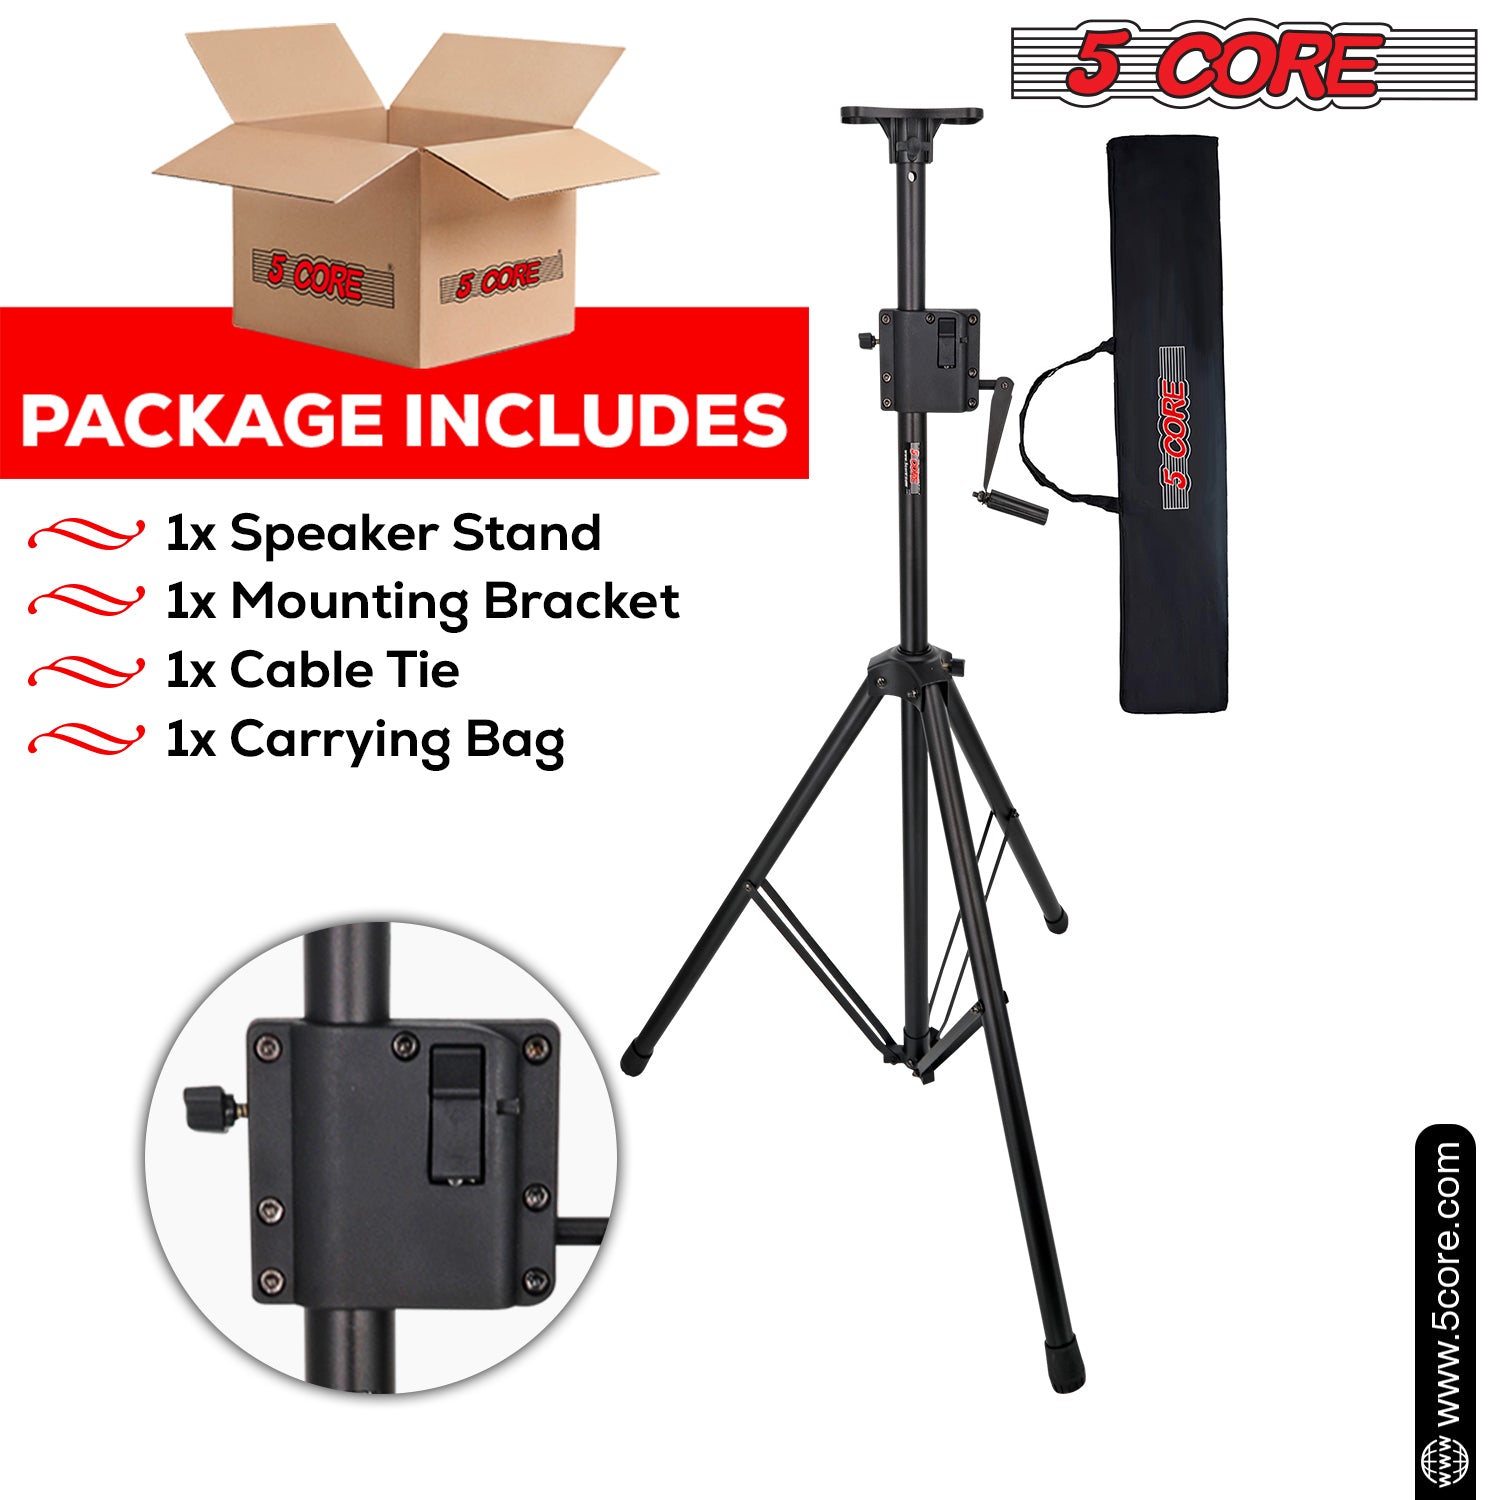 Speaker stand include mounting bracket, cable tie, carrying bag.